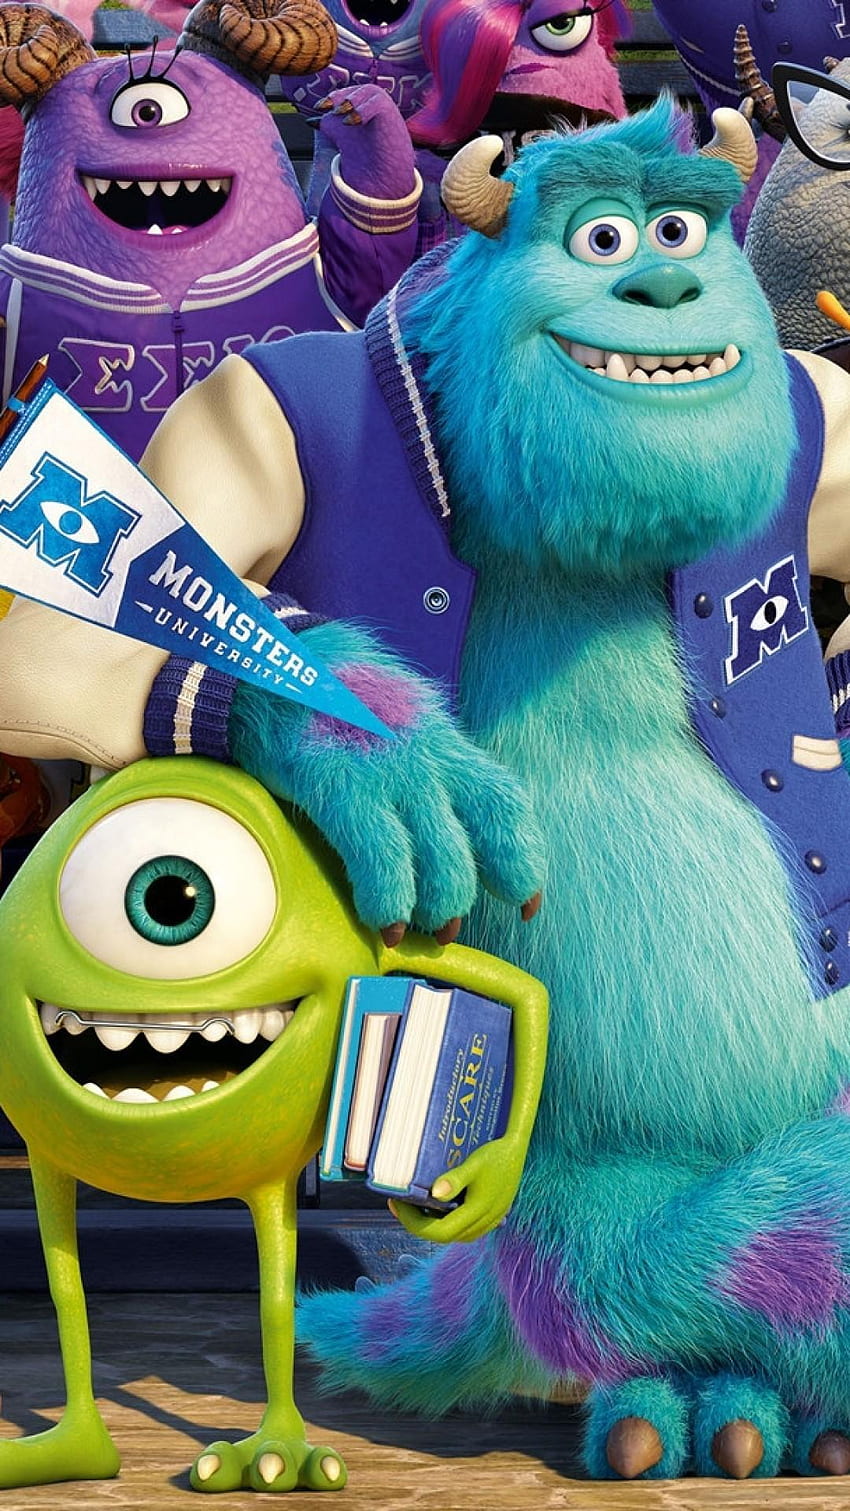 Monsters inc iphone HD wallpapers  Pxfuel